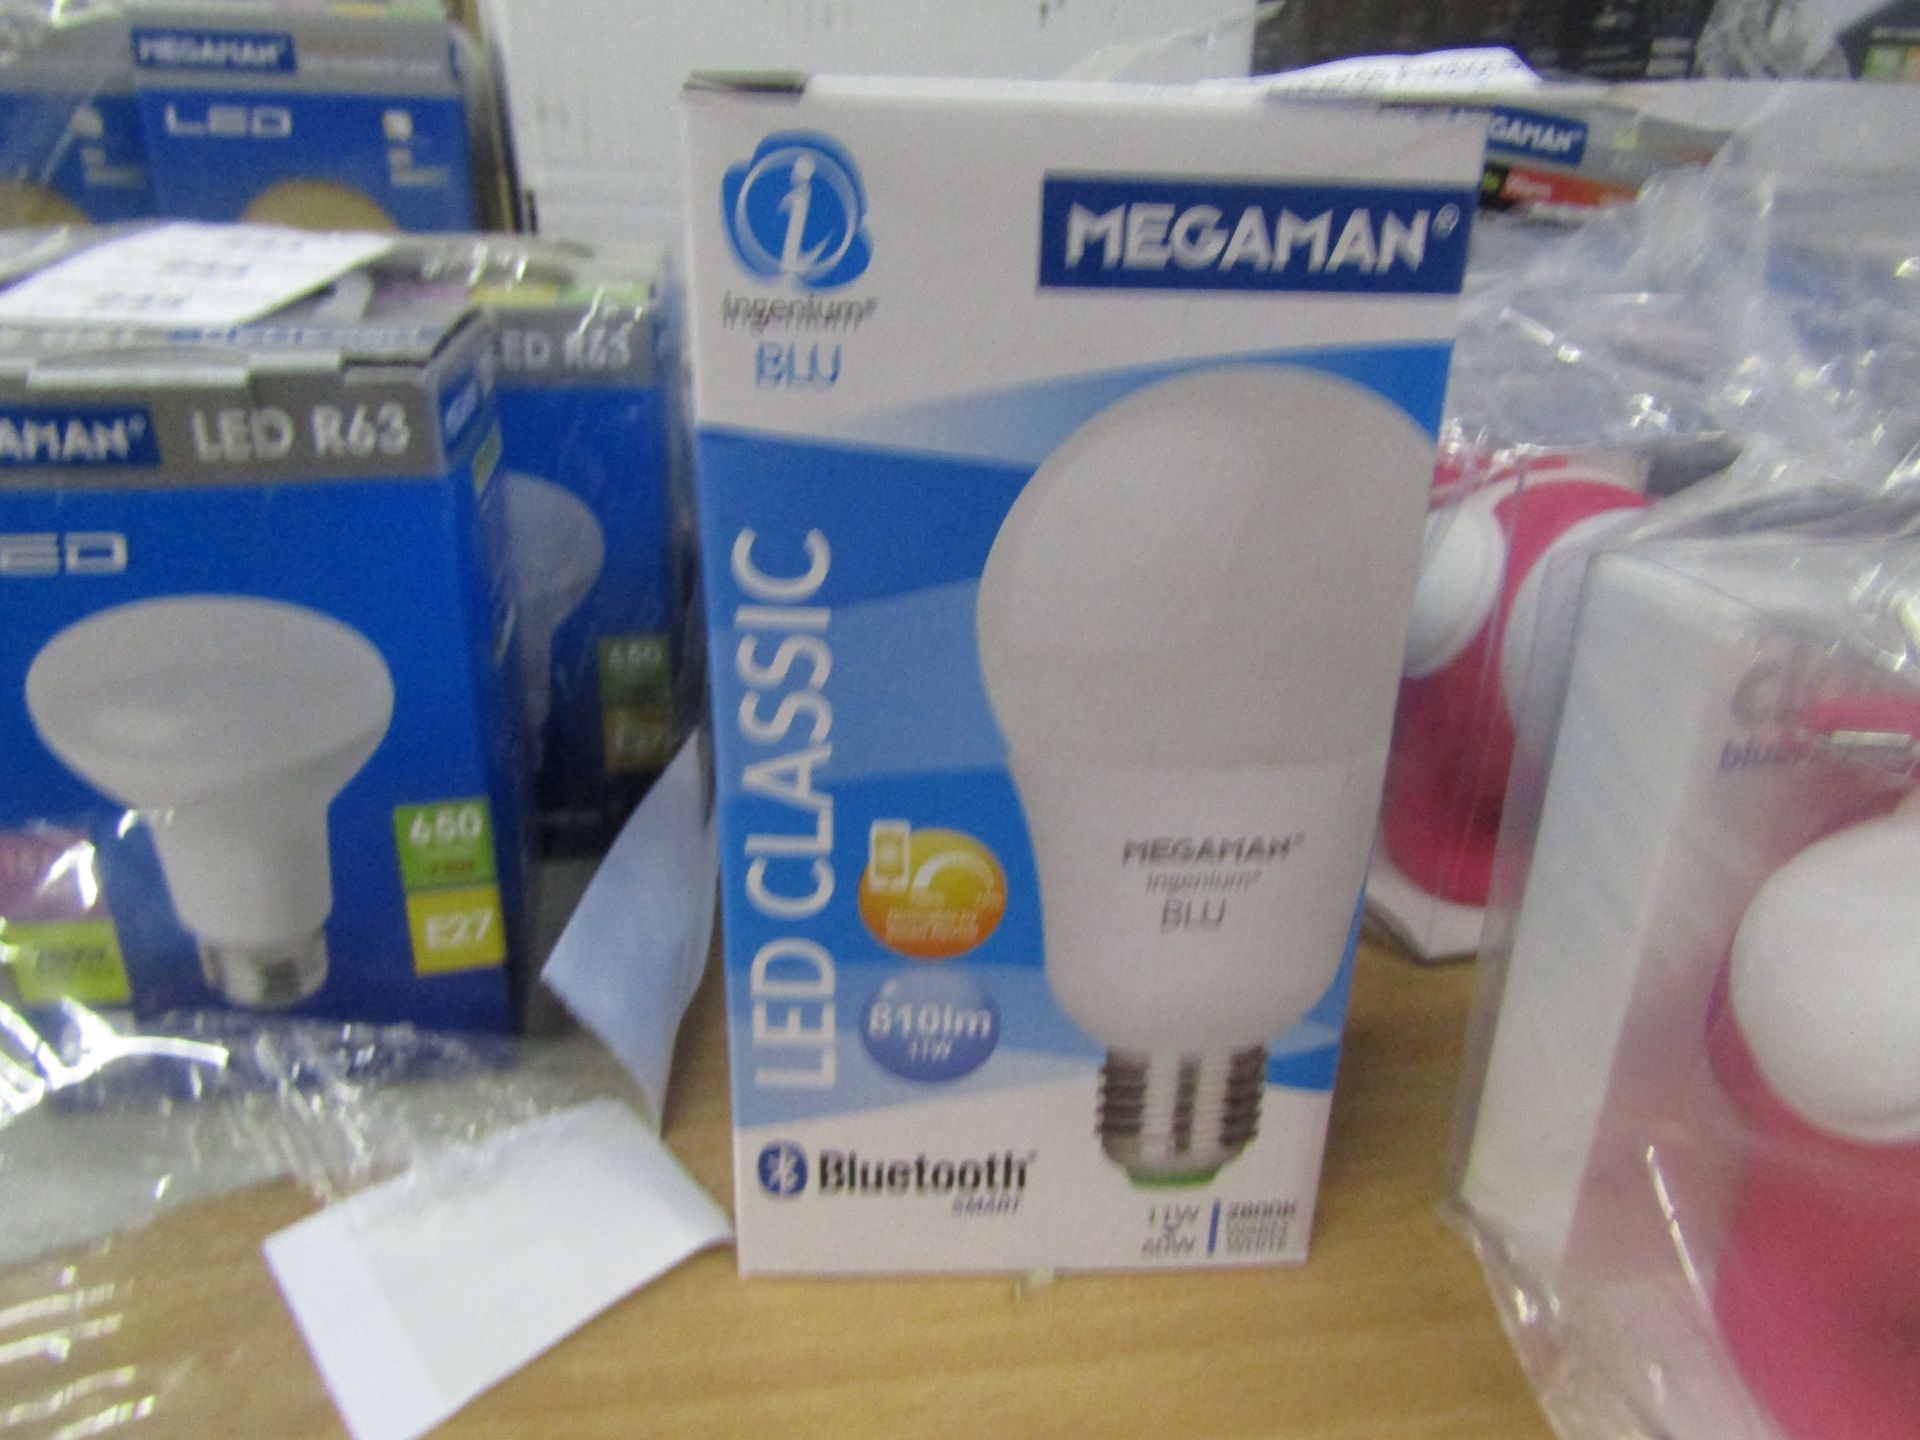 3xMegaman Bluetooth bulb, new and boxed. B22 / 25,000Hrs / 810 Lumen